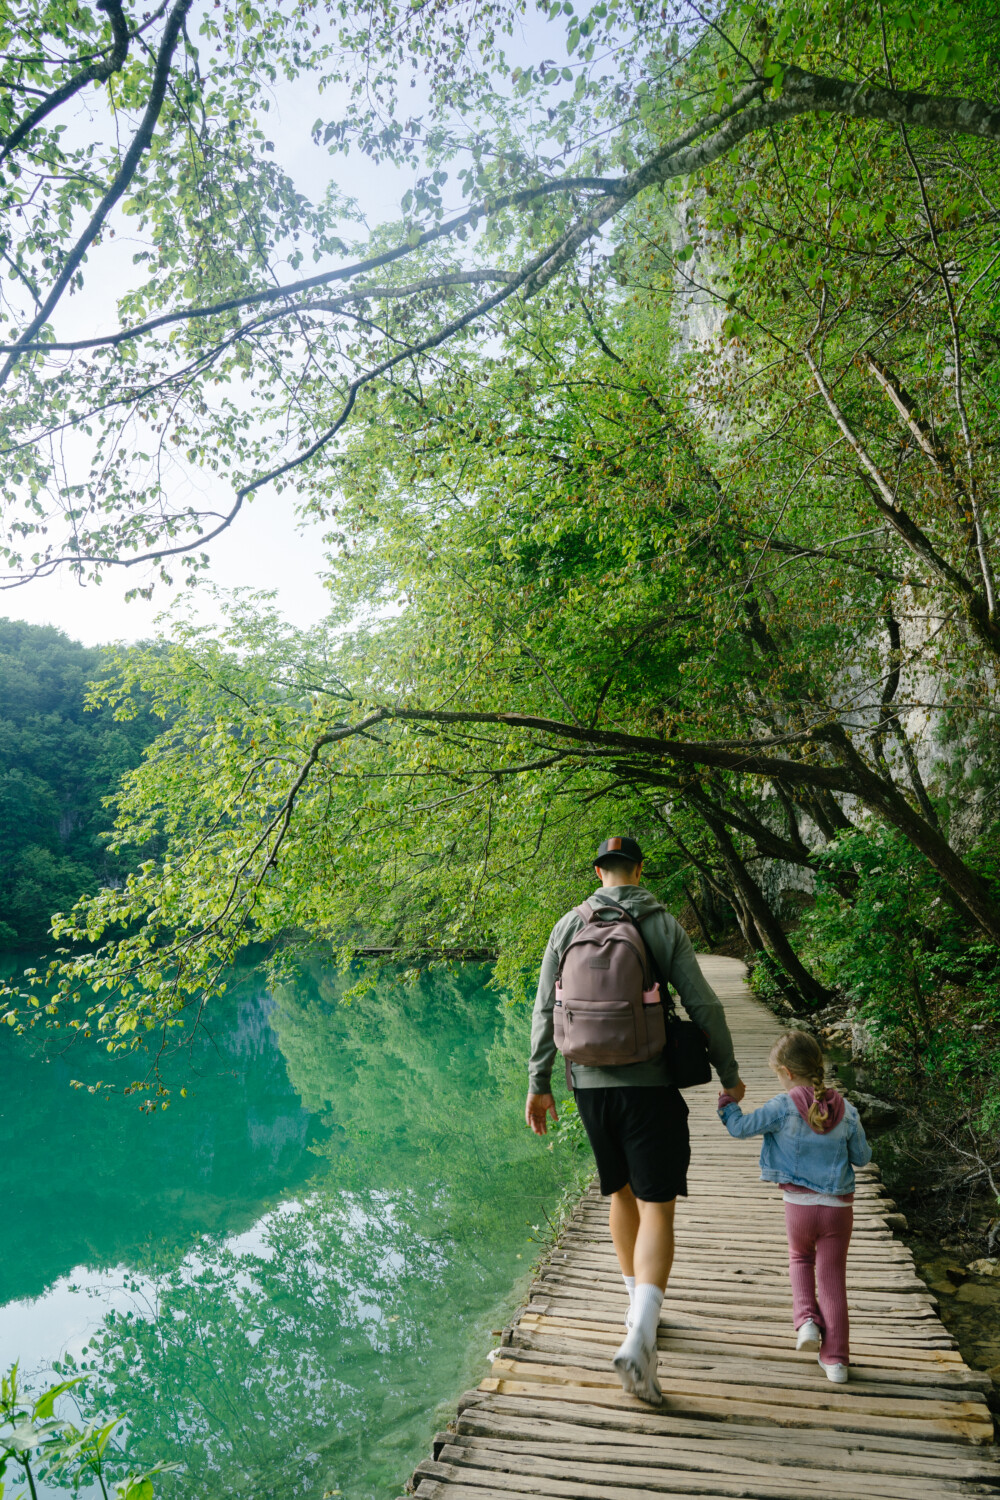 Ruth Nuss' husband with her kid at Plitvice Lakes National Park